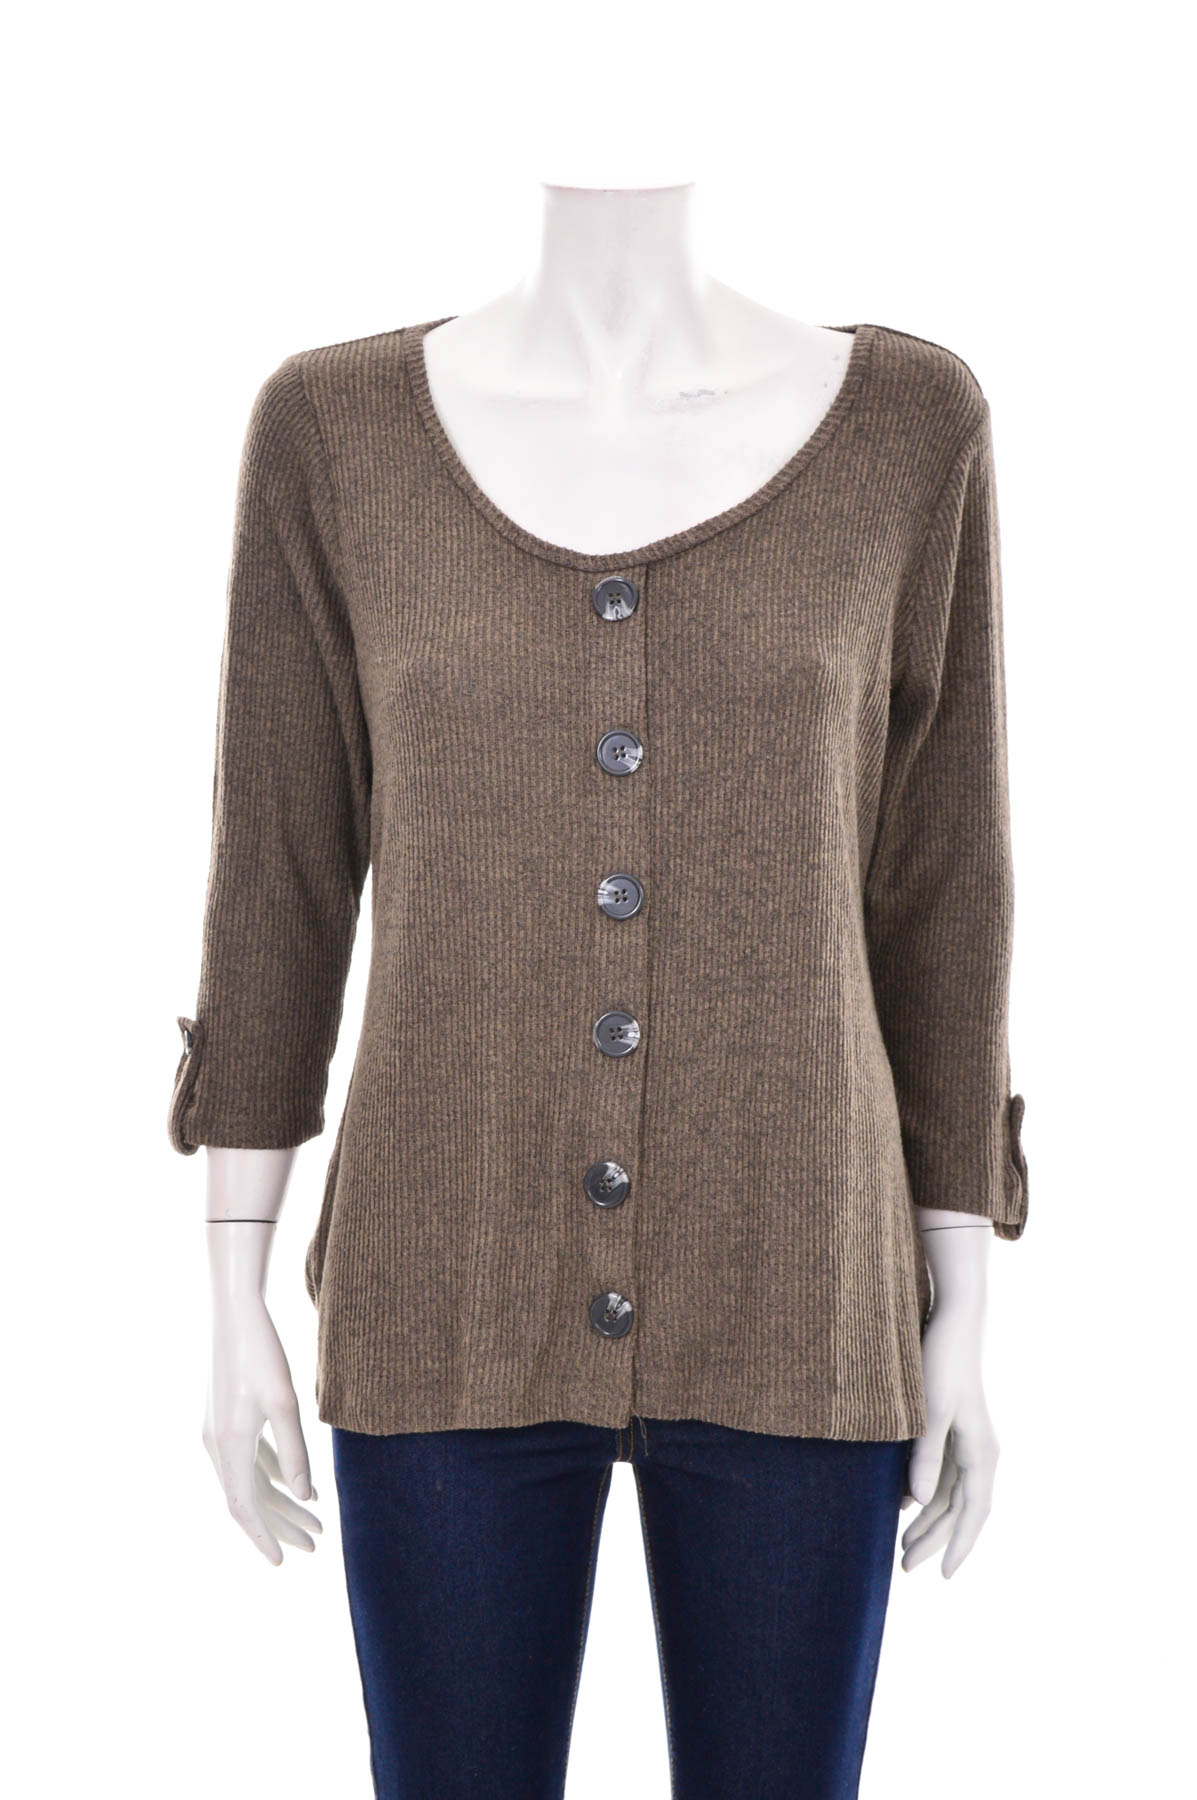 Women's sweater - French Laundry - 0